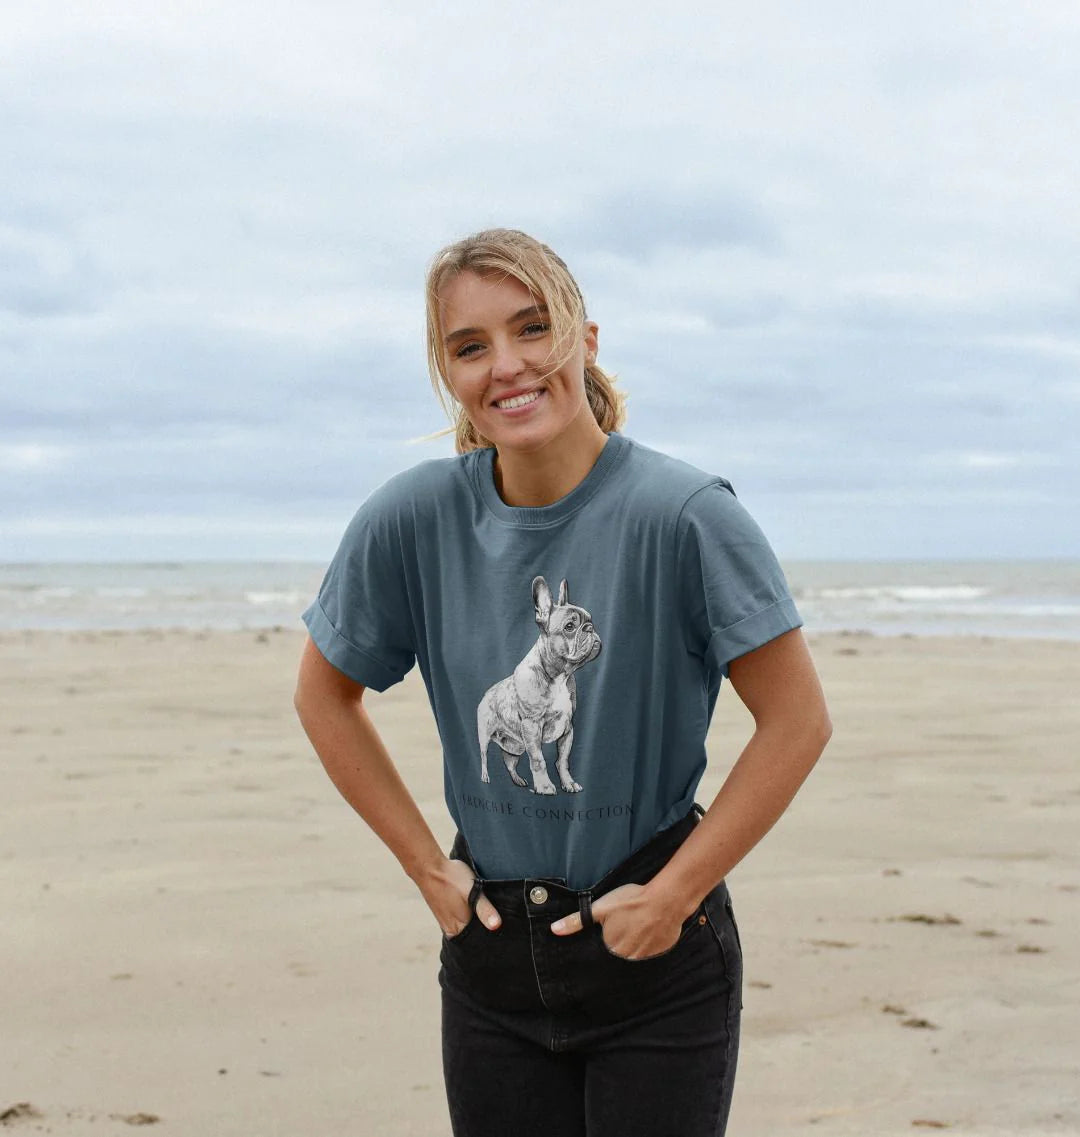 Lady on beach wearing frenchie t-shirt